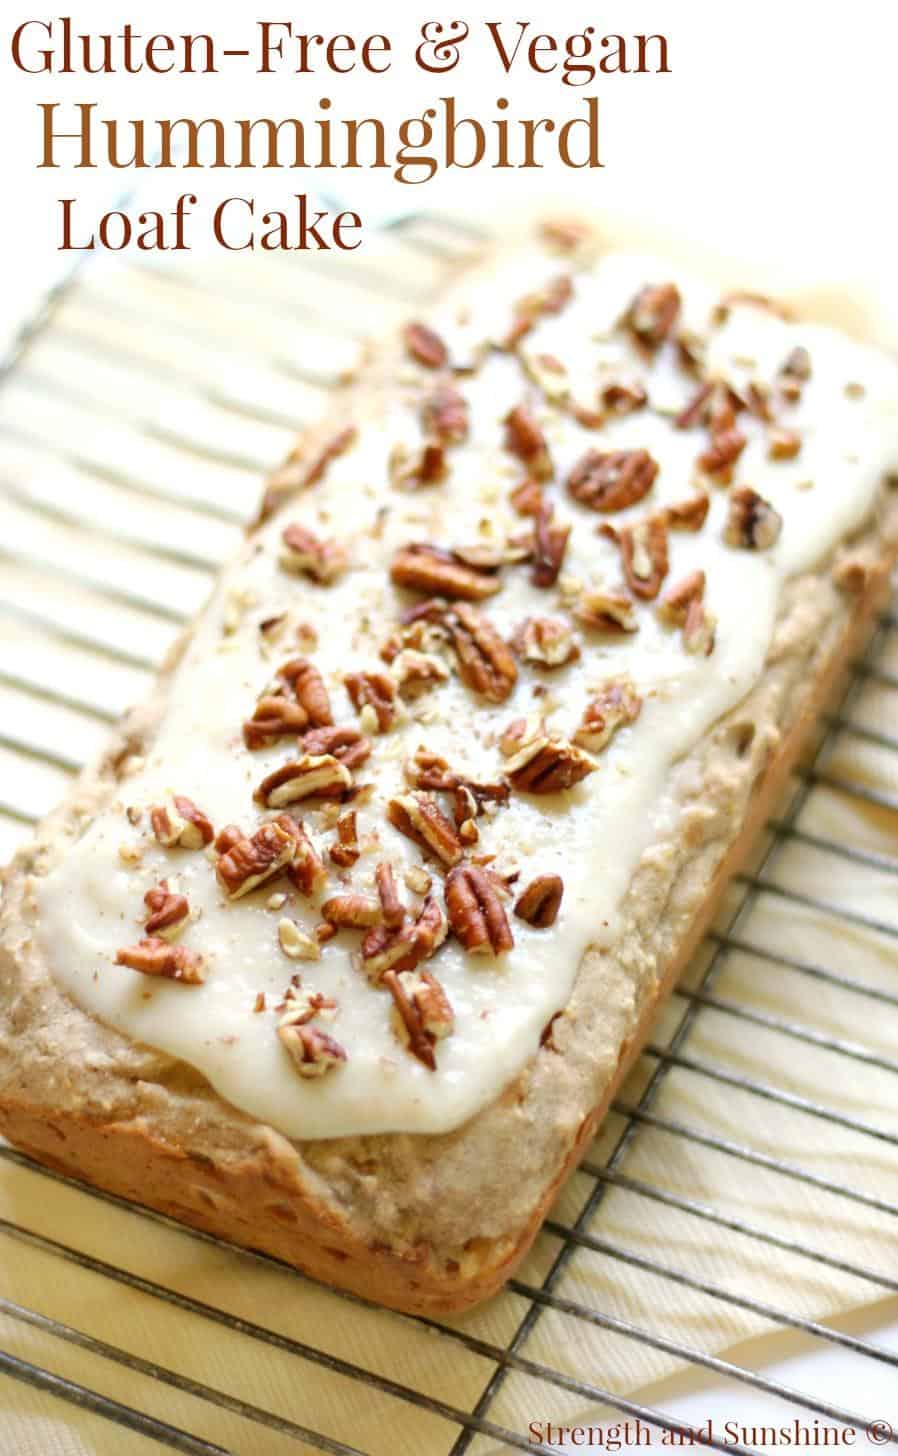  This deliciously moist Hummingbird bread will have you humming with joy!